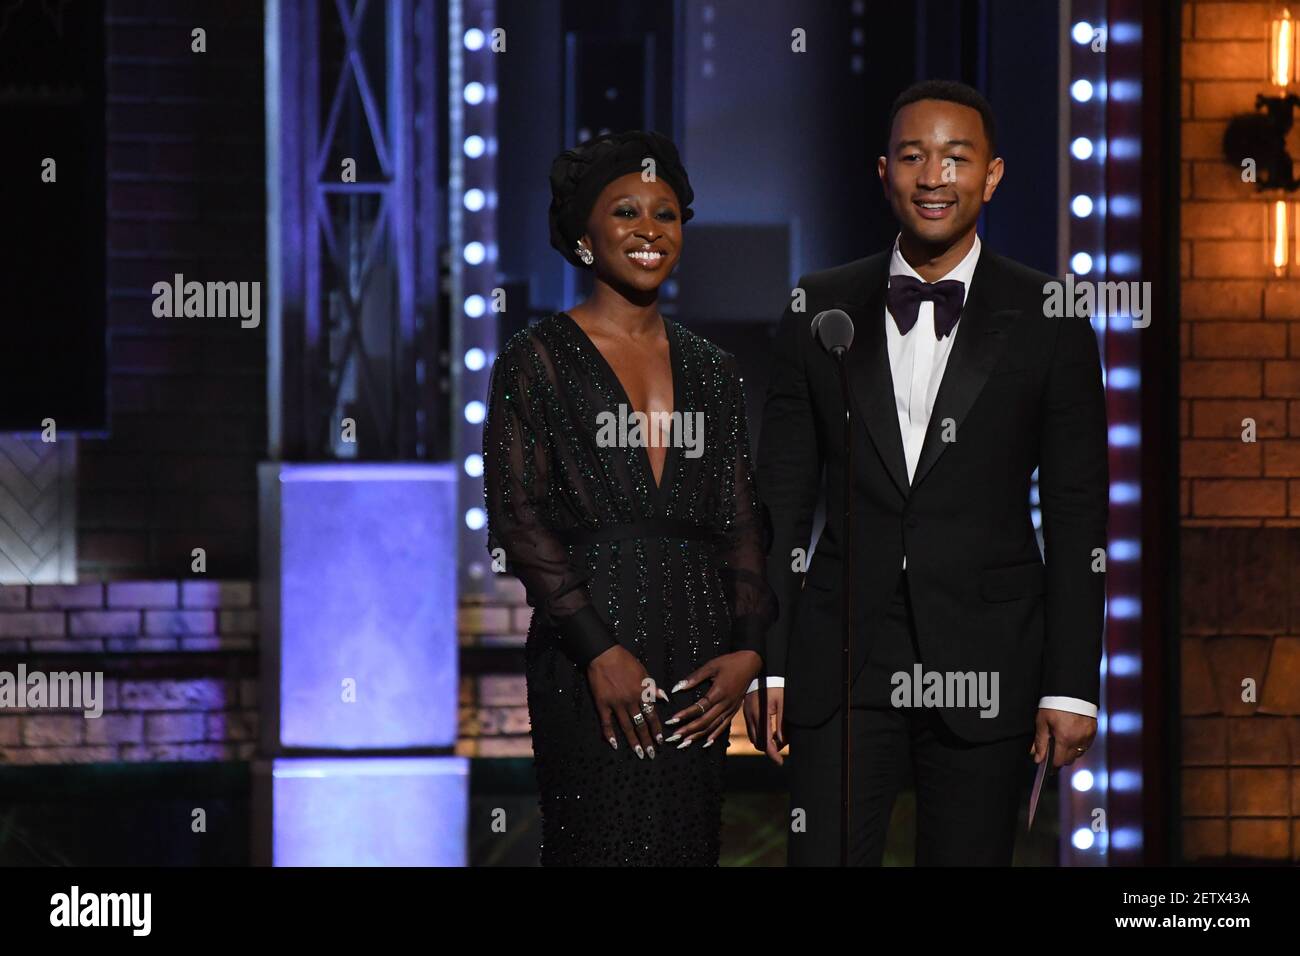 Jun 11, 2017; New York, NY, USA; Cynthia Erivo and John Legend present the award for Best Score at the 71st TONY Awards at Radio City Music Hall. Mandatory Credit: Robert Deutsch-USA TODAY Sports *** Please Use Credit from Credit Field *** Stock Photo